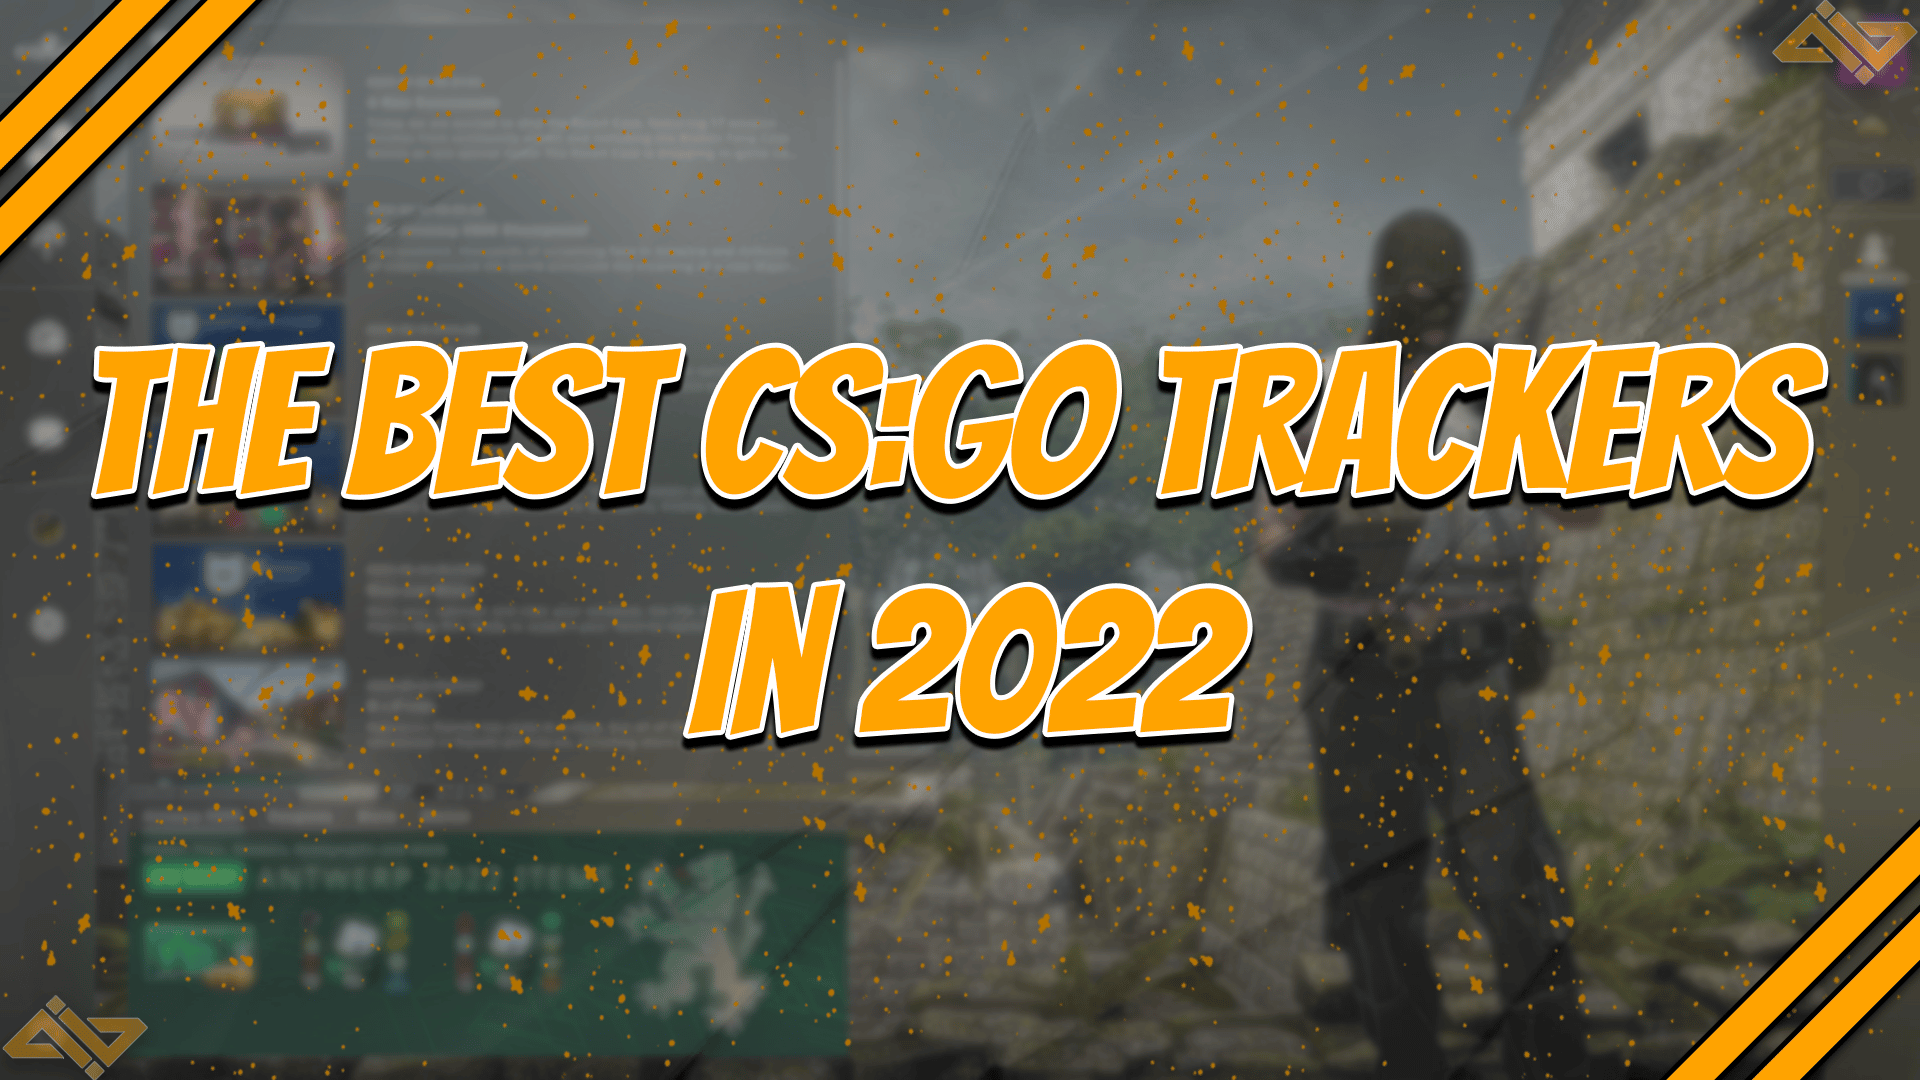 The best cs:go trackers in 2022